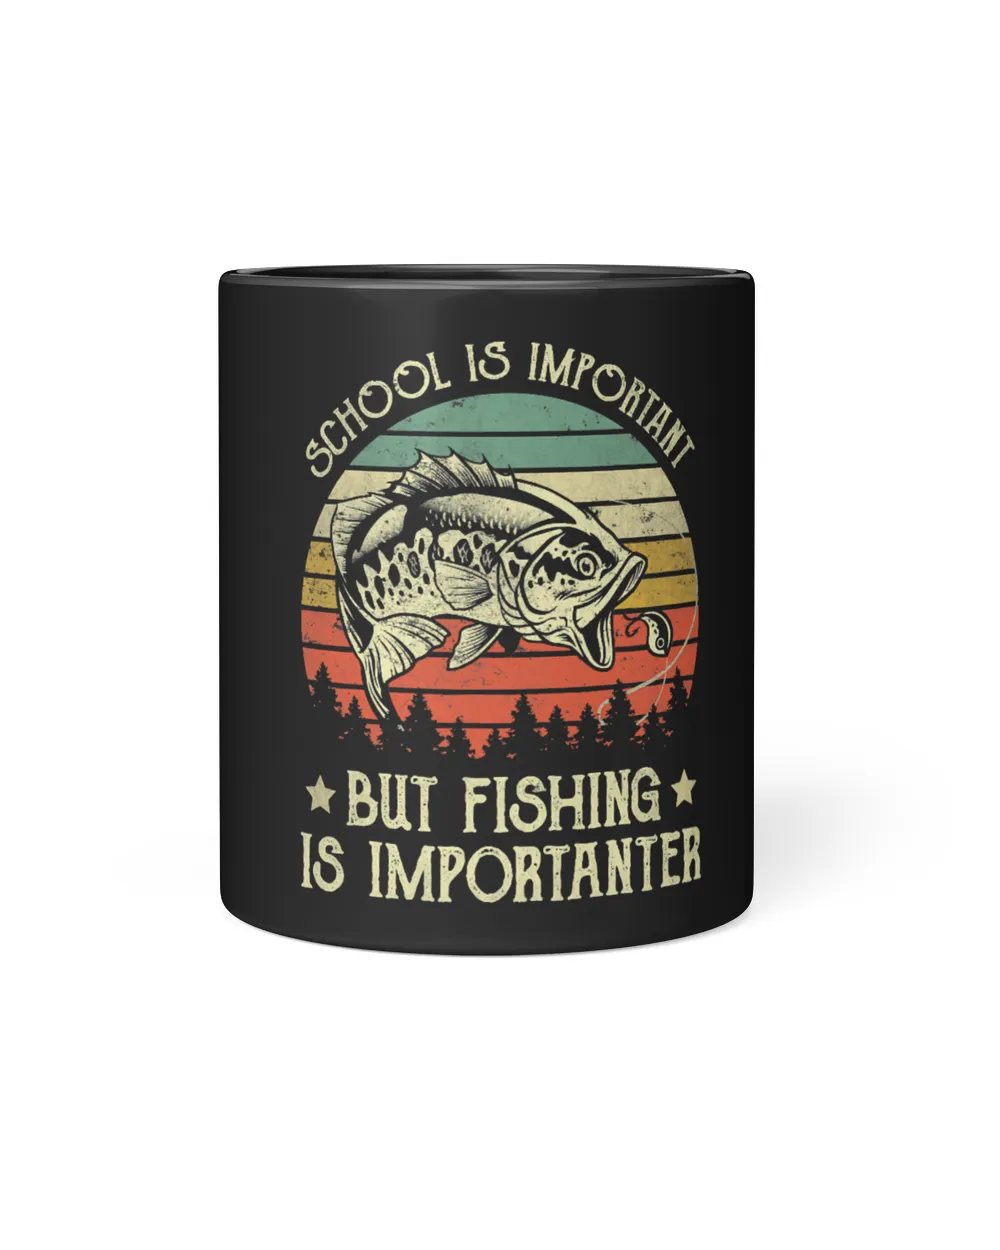 Vintage School Is Important But Fishing Is Importanter